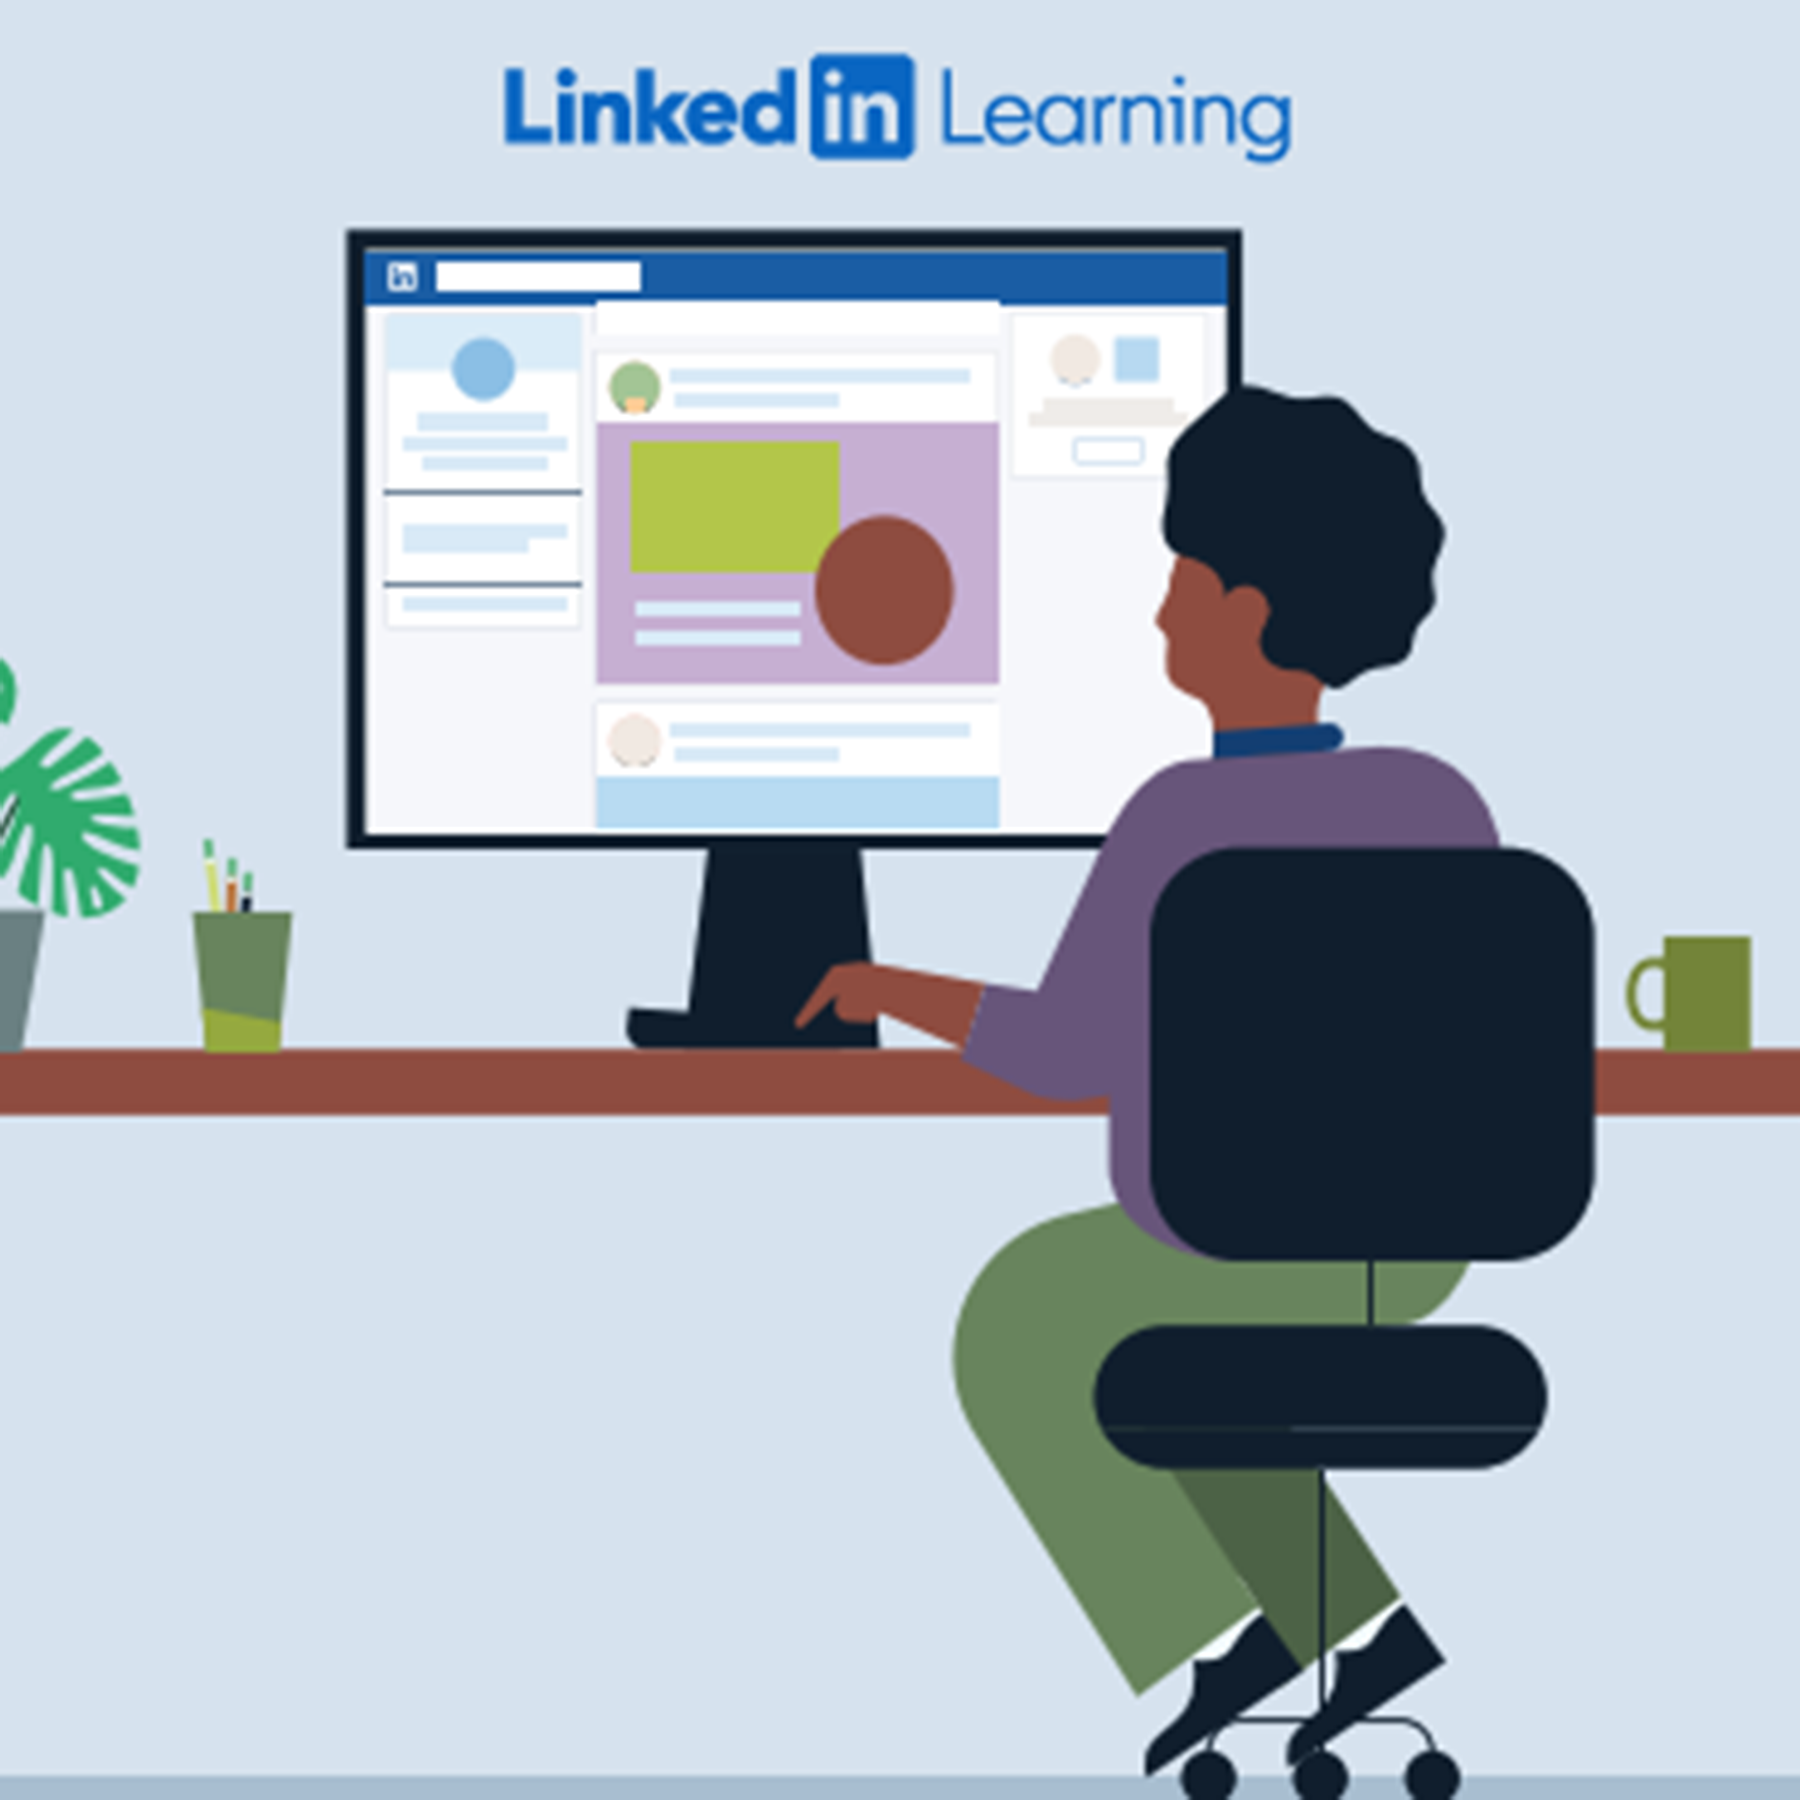 Illustration of a person sitting at a desk with LinkedIn Learning on computer screen